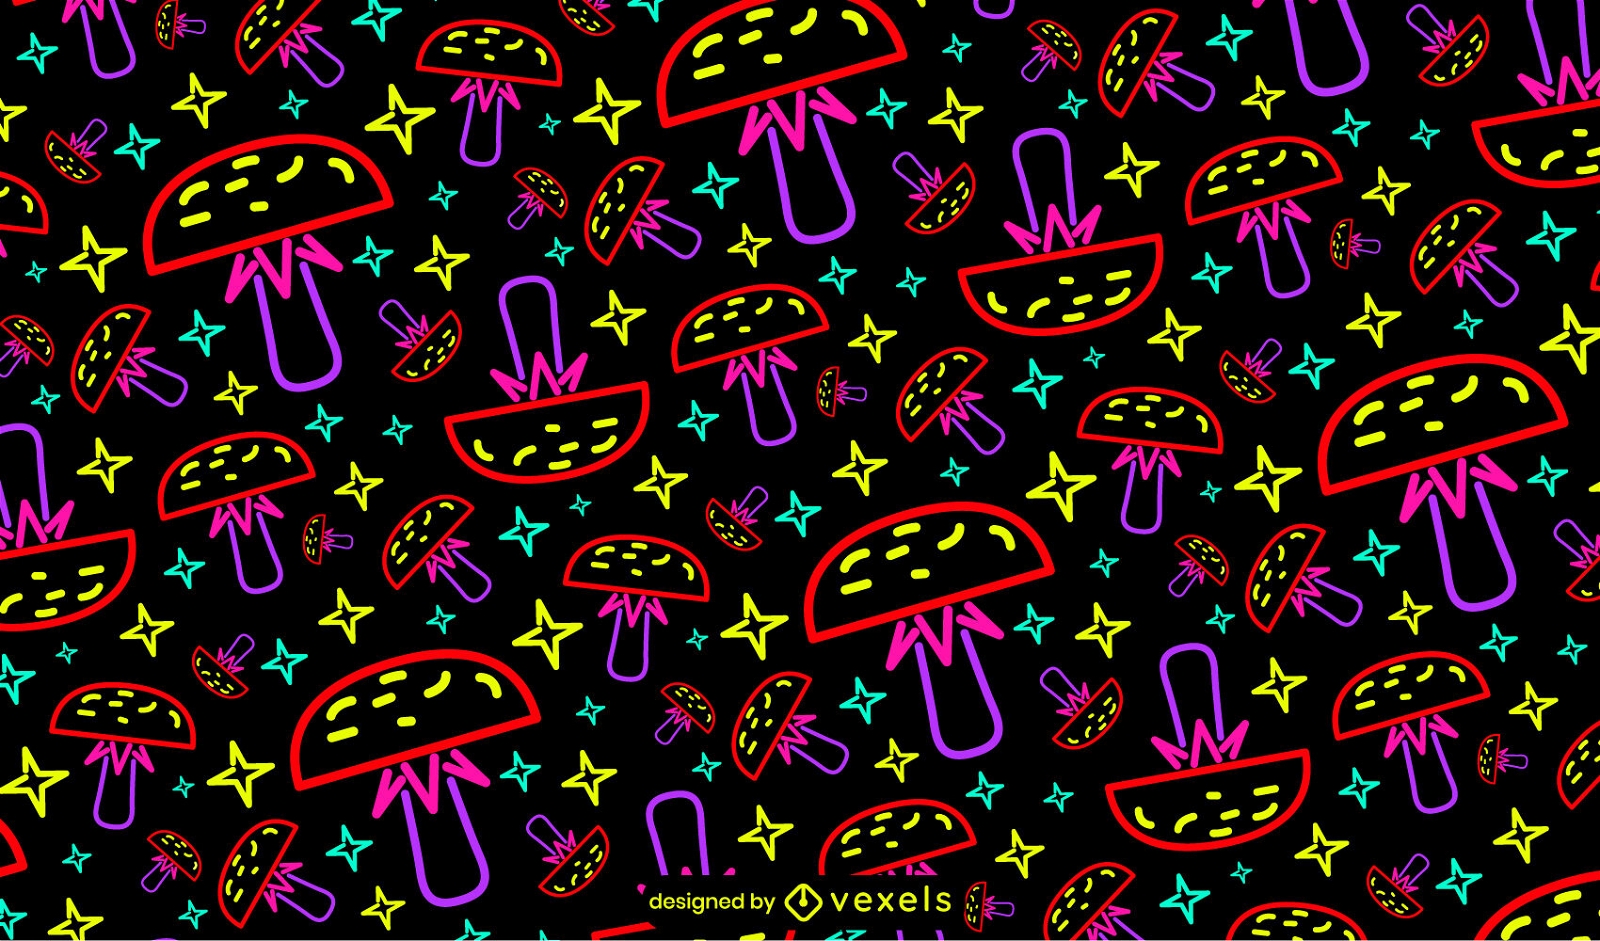 Neon psychedelic mushrooms pattern